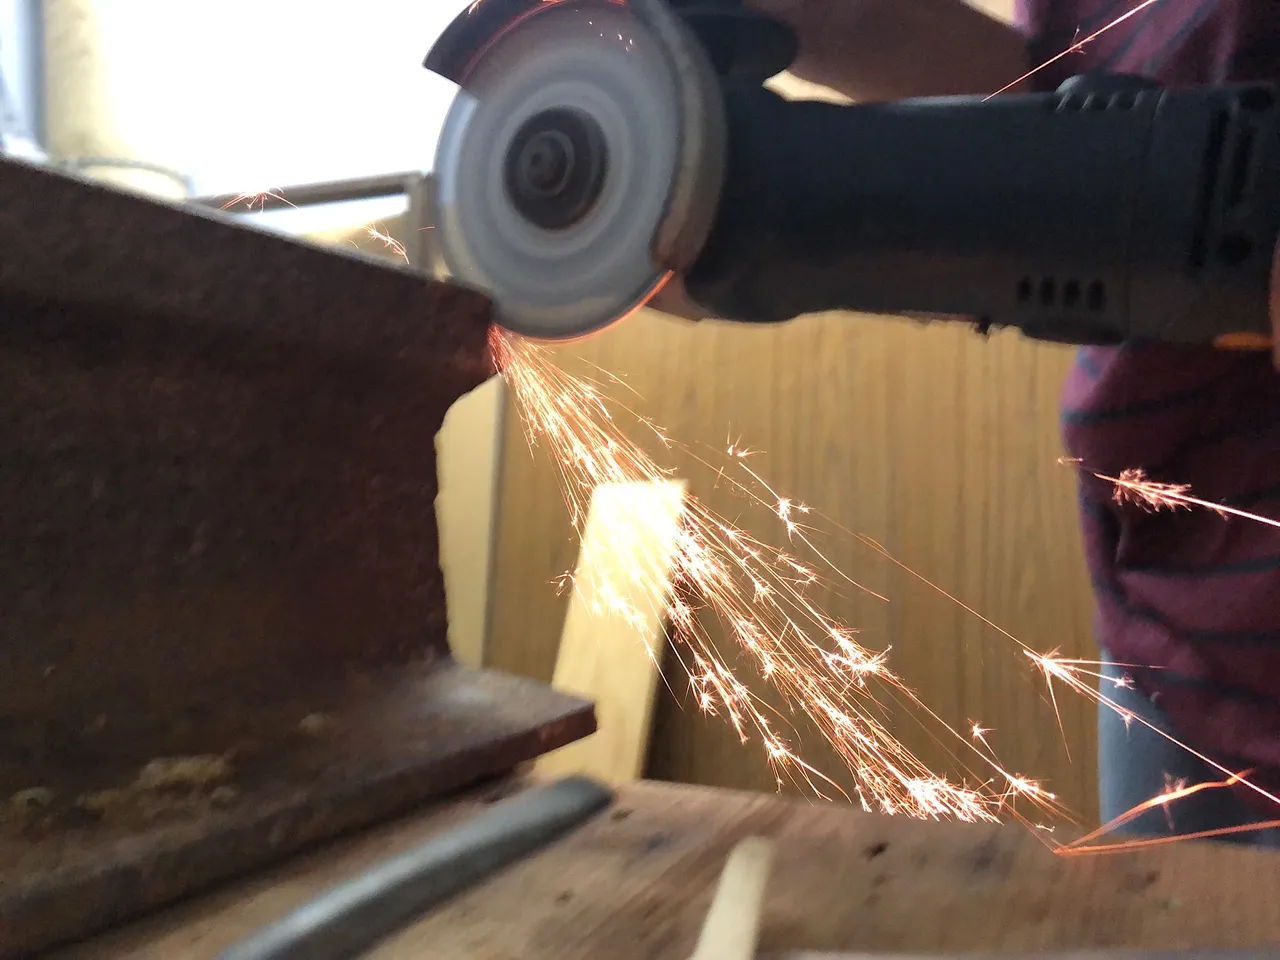 Cutting a crane rail with a 4.5" angle grinder